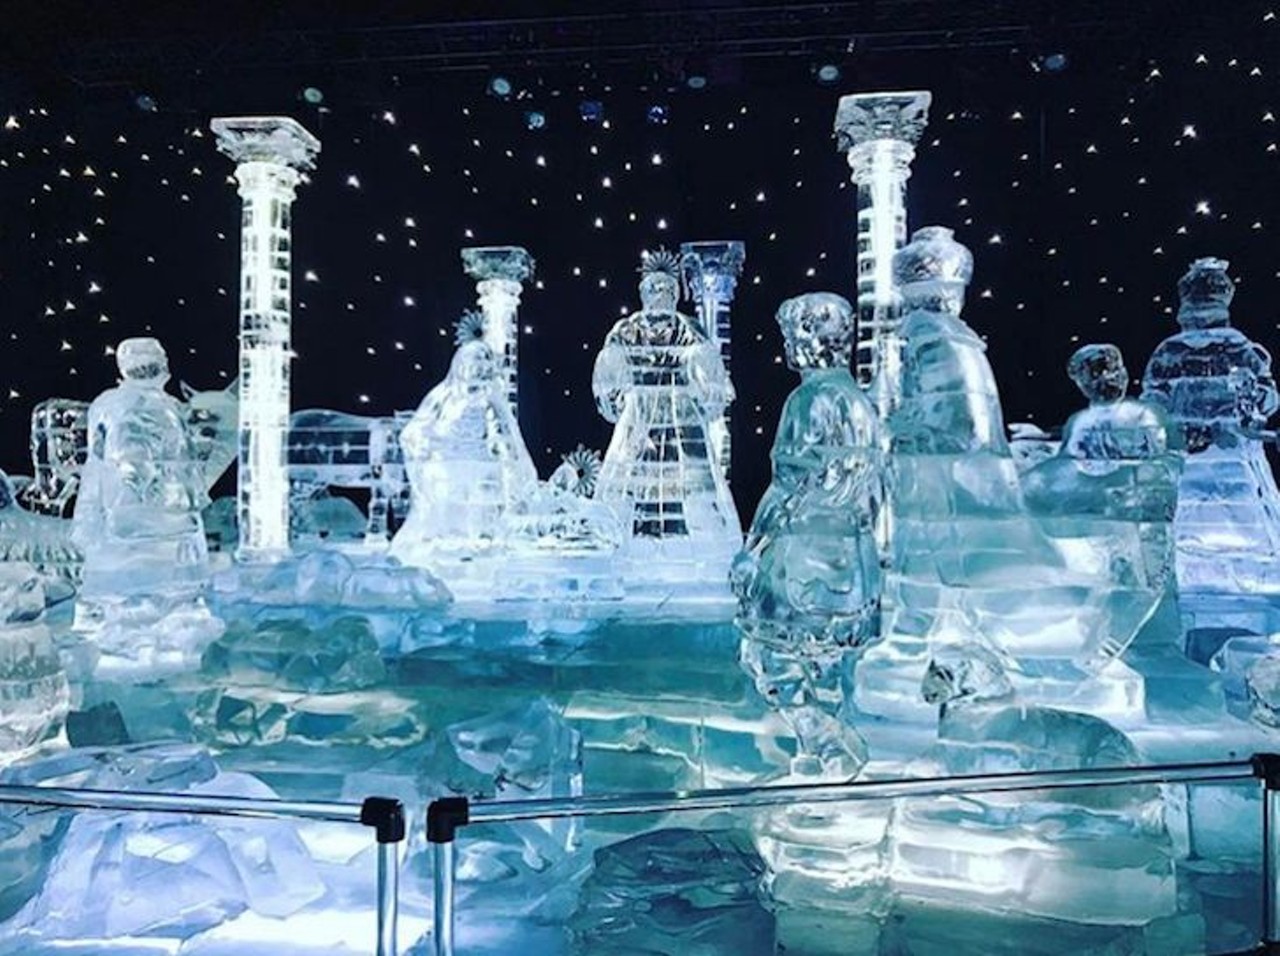 Nov. 21-Jan. 7
Ice! Christmas Around the World 
Holiday exhibit created from more than 70 tons of hand-carved ice. Gaylord Palms Resort, 6000 W. Osceola Parkway, Kissimmee; $28.99-$55.99; 407-586-2000.
Photo via filawhoopwhoop/Instagram